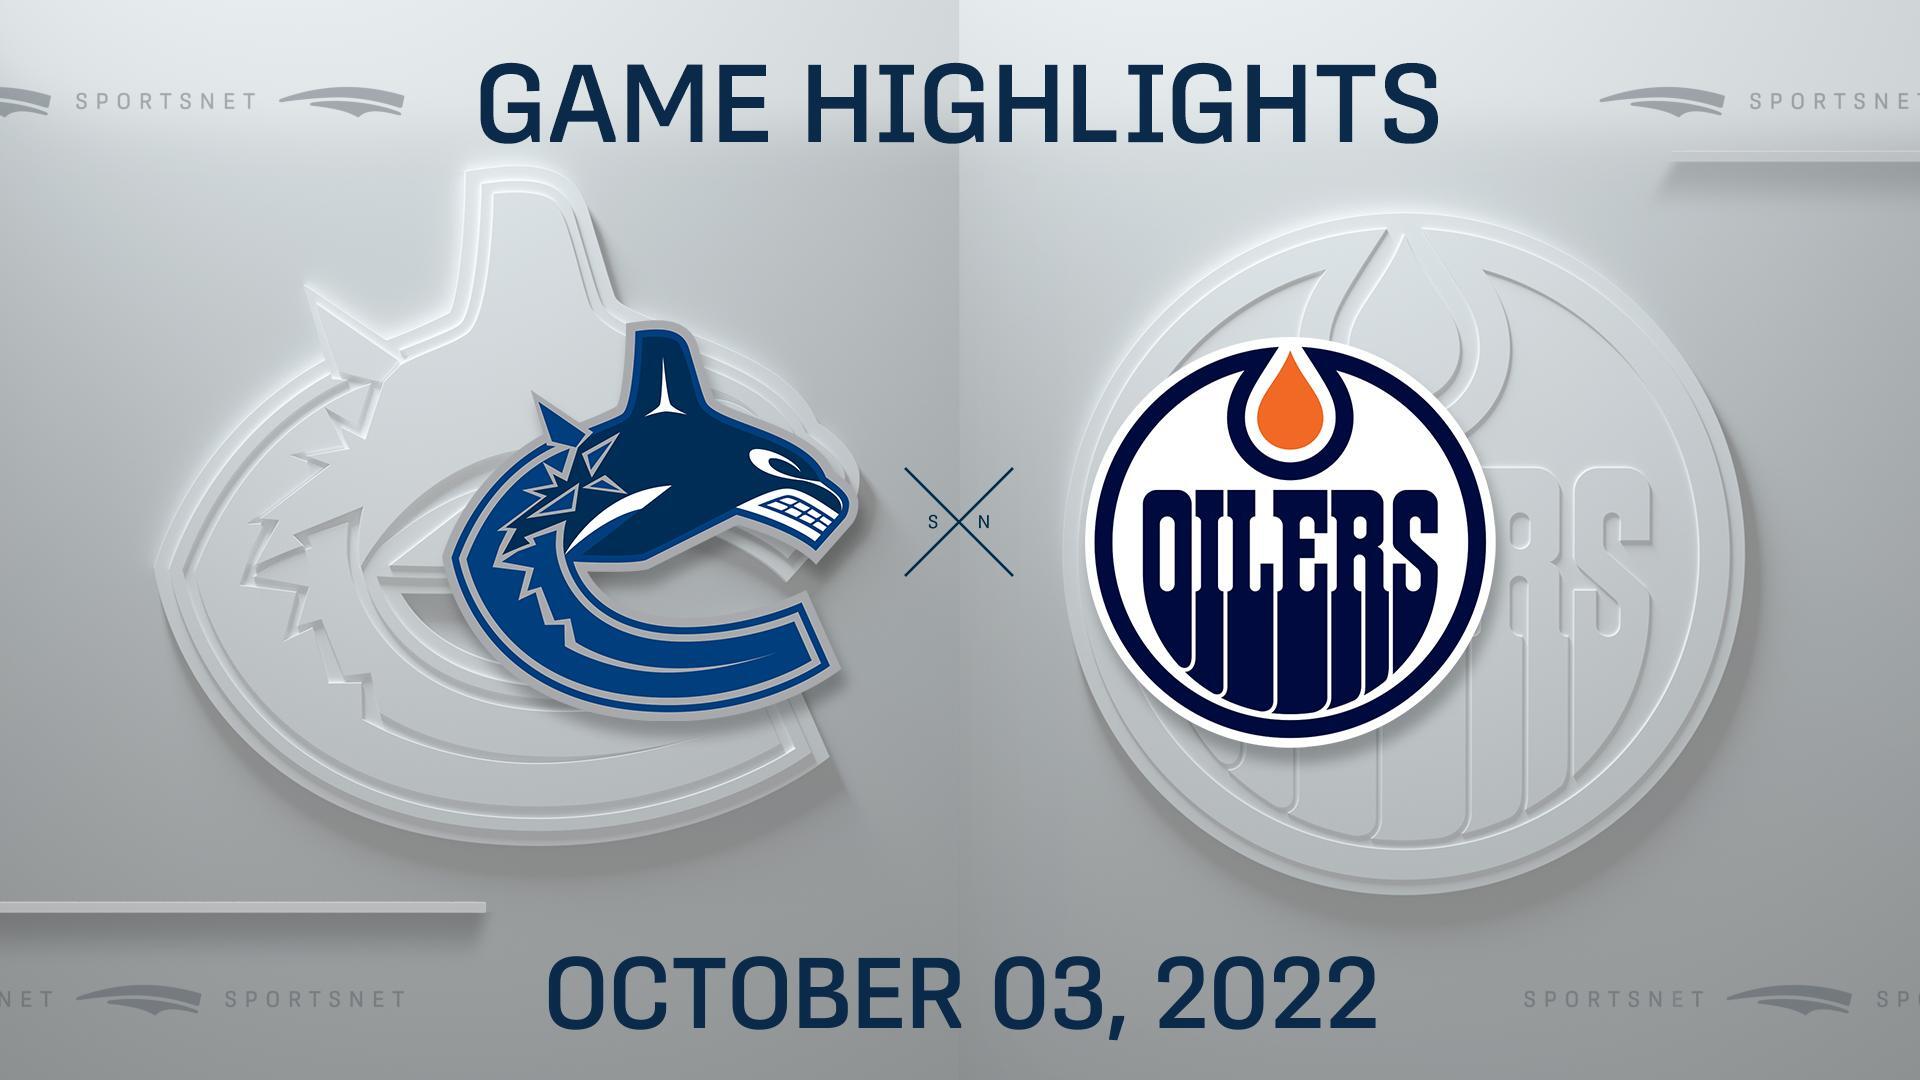 Holloway scores 3 to lead Oilers to 7-2 pre-season rout over Canucks -  Vernon Morning Star